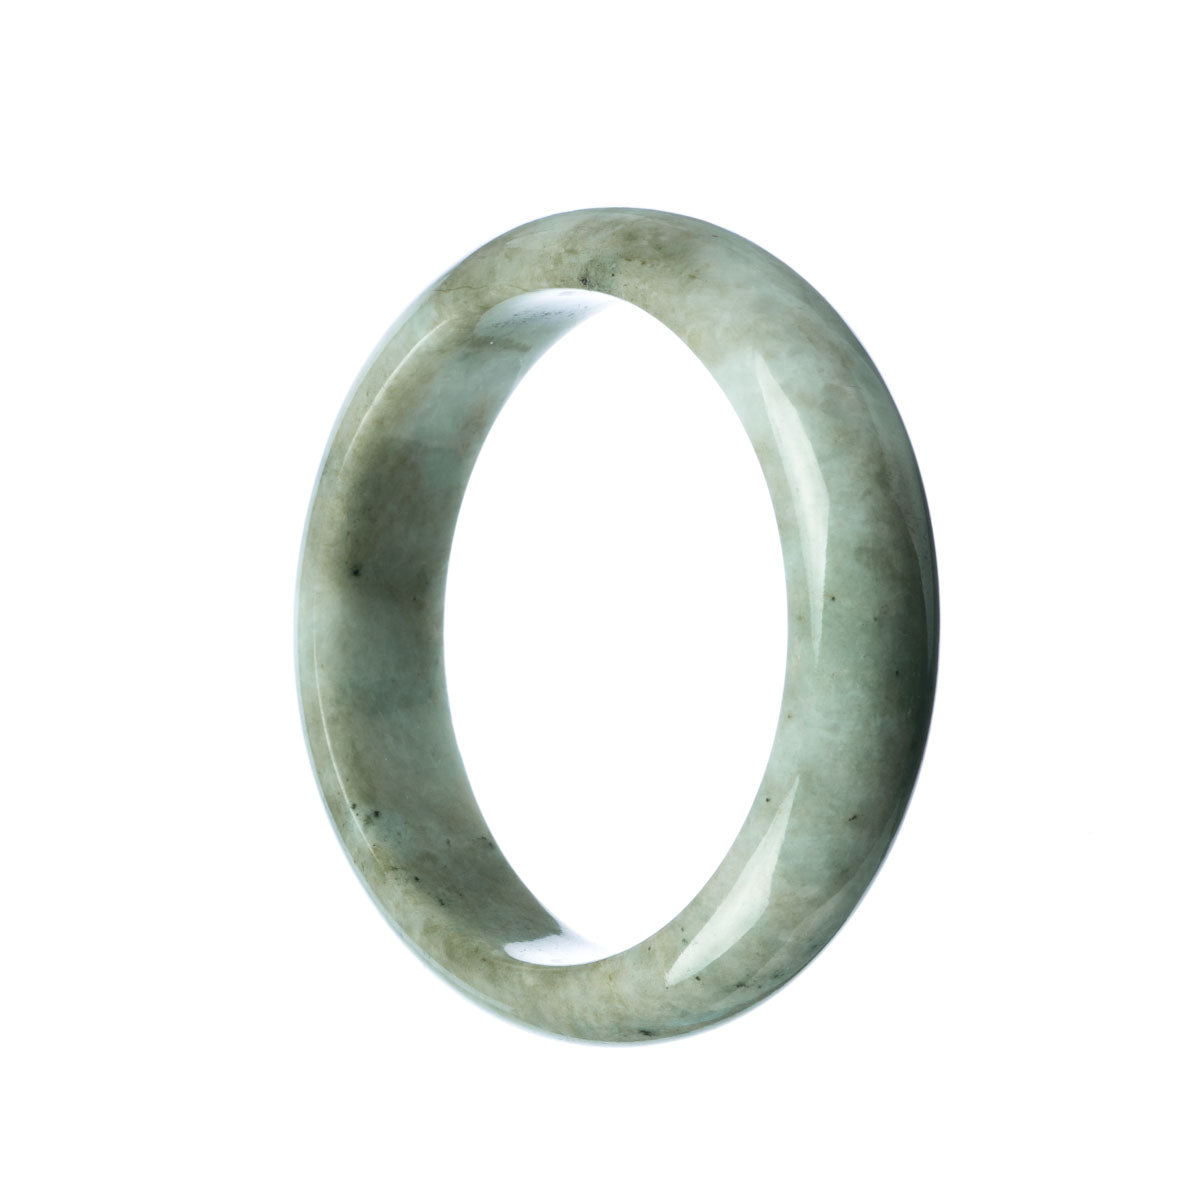 A beautiful grey green Burmese Jade bangle bracelet with a half moon shape, measuring 59mm in diameter. Perfect for adding a touch of elegance and natural beauty to any outfit. From the trusted brand, MAYS.